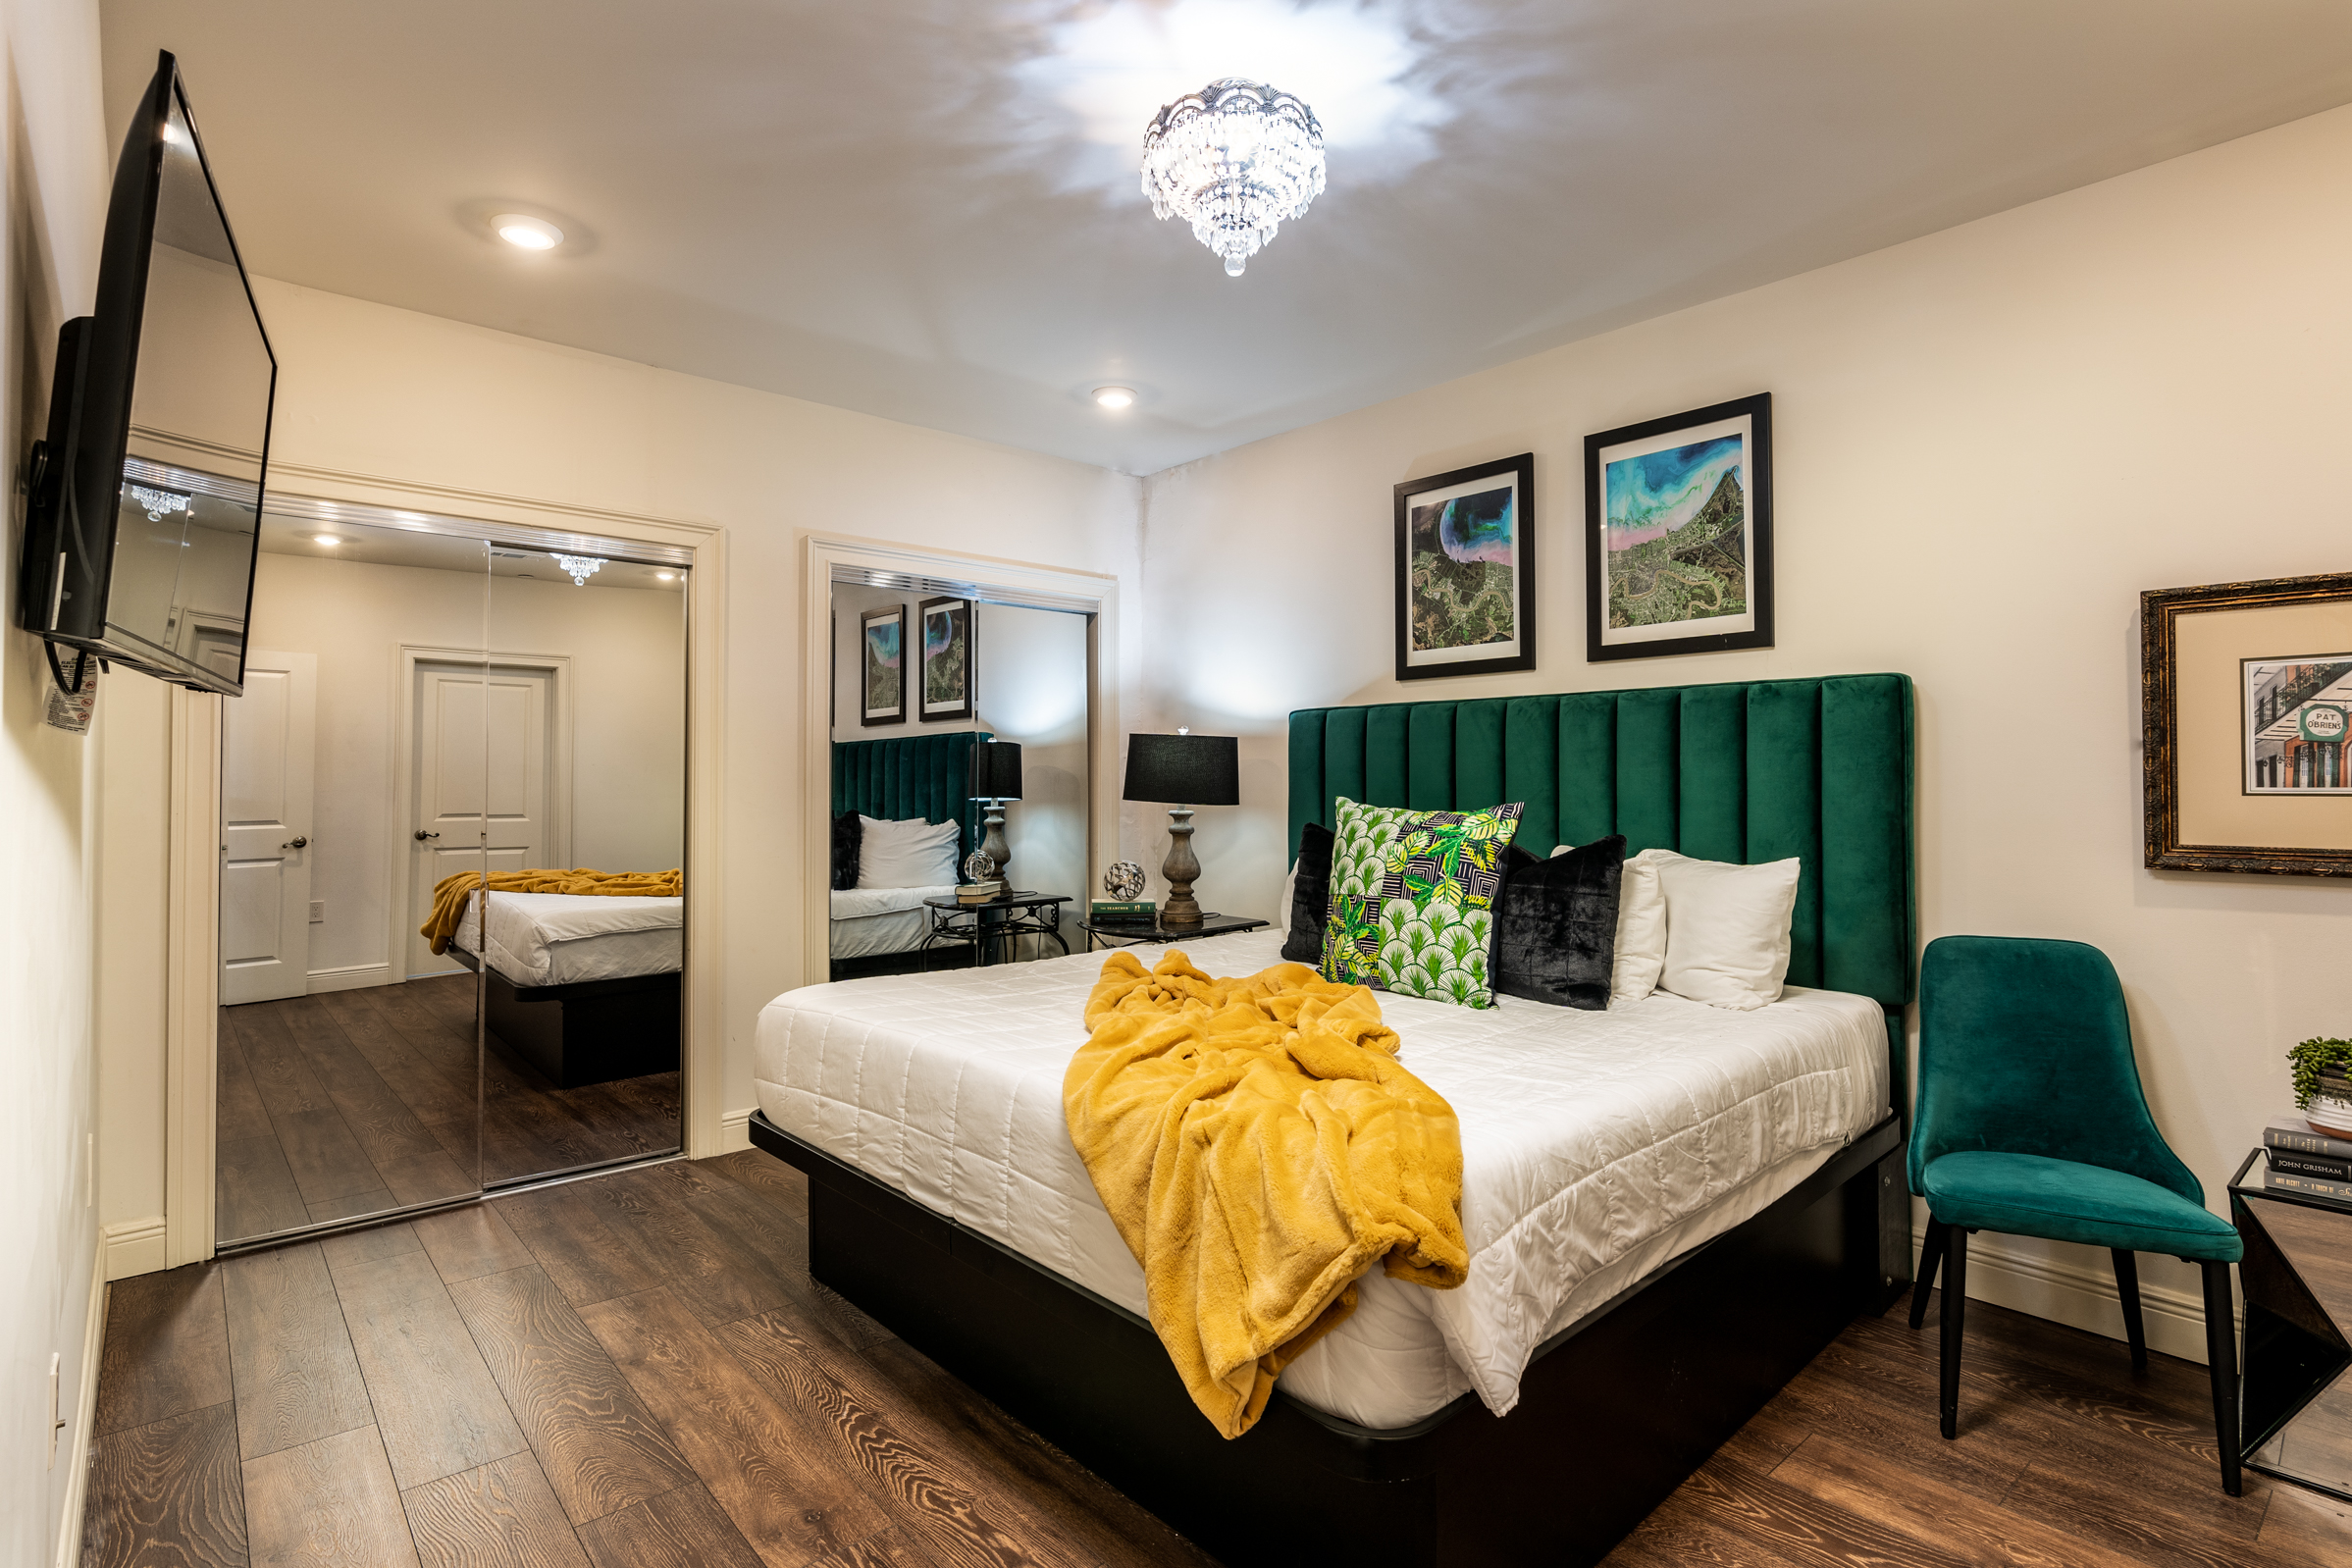 The Alexandre Unit 304 bedroom, a New Orleans luxury rental.